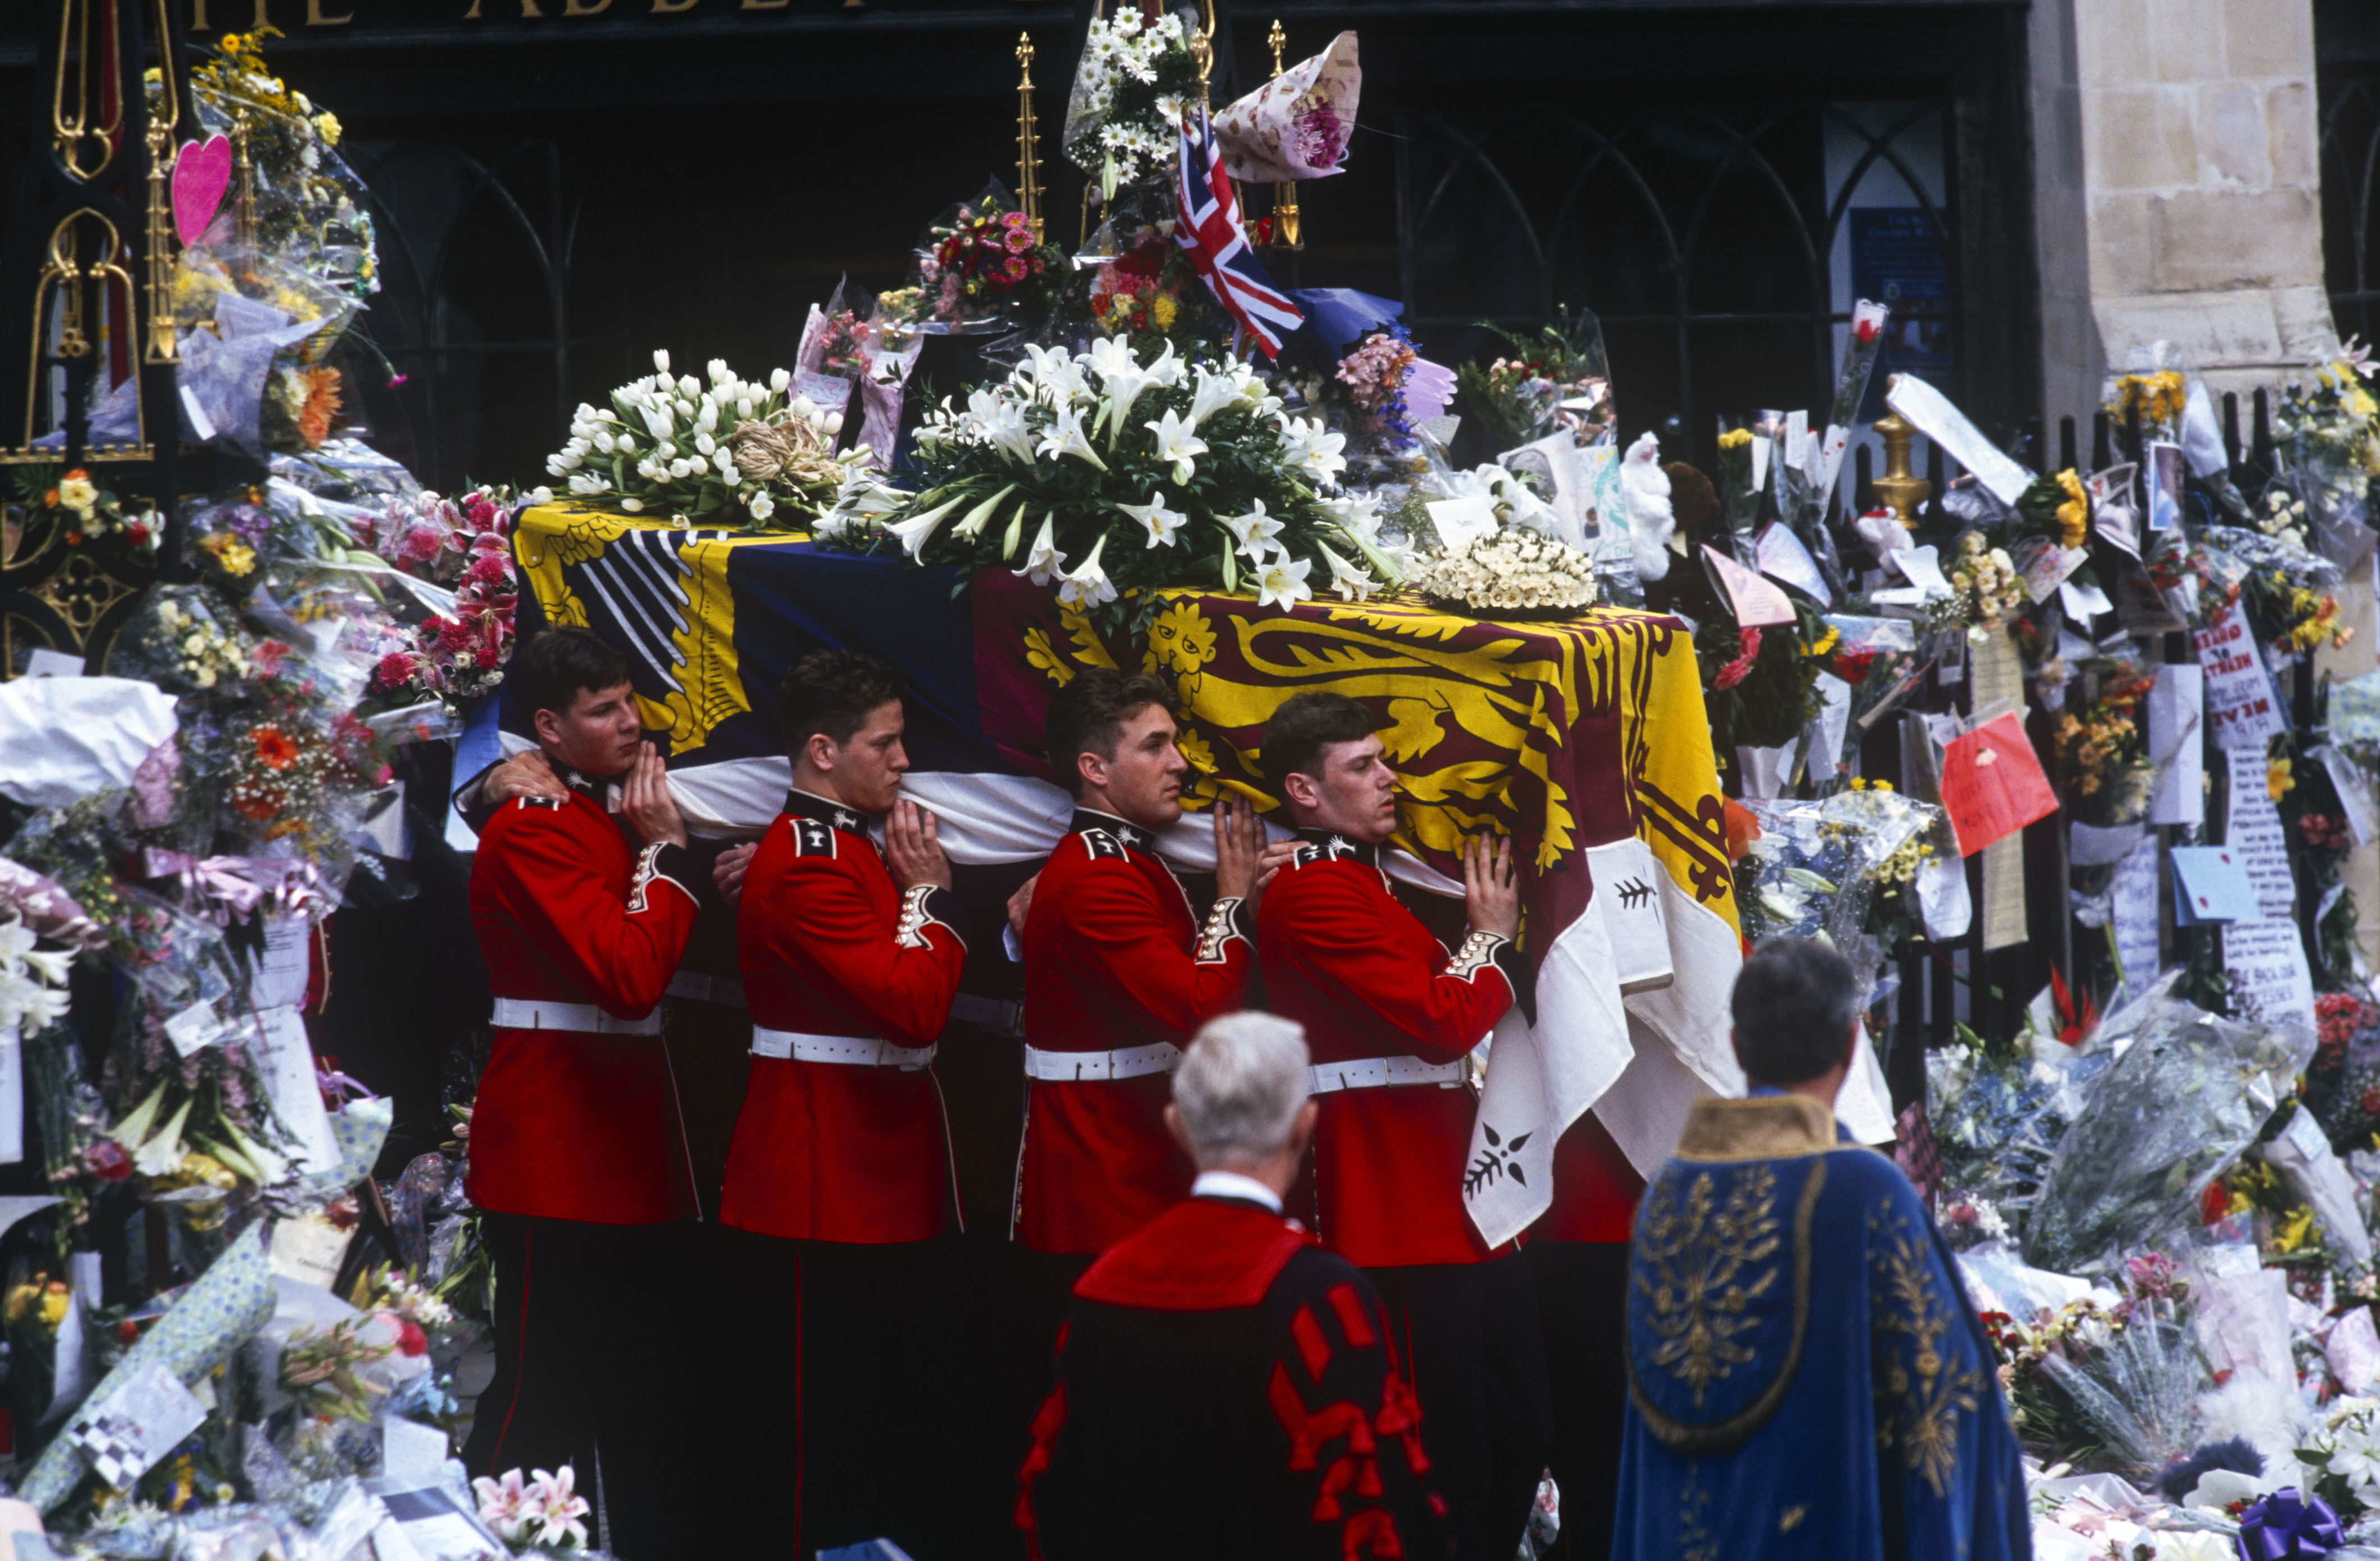 <p>Guardsmen of the Prince of Wales Company of the Welsh Guards carried Princess Diana's casket into Westminster Abbey in London during her funeral on Sept. 6, 1997. </p><p>The coffin was draped with the Royal Standard and topped with floral arrangements from Diana's sons, Prince William and Prince Harry, and brother, Earl Spencer. </p><p>She was buried on an island in an oval lake at Althorp House, the Spencer family estate in Northamptonshire, England. According to her former butler Paul Burrell, her brother removed the Royal Standard before she was buried at their childhood home and replaced it with the Spencer family flag.</p>